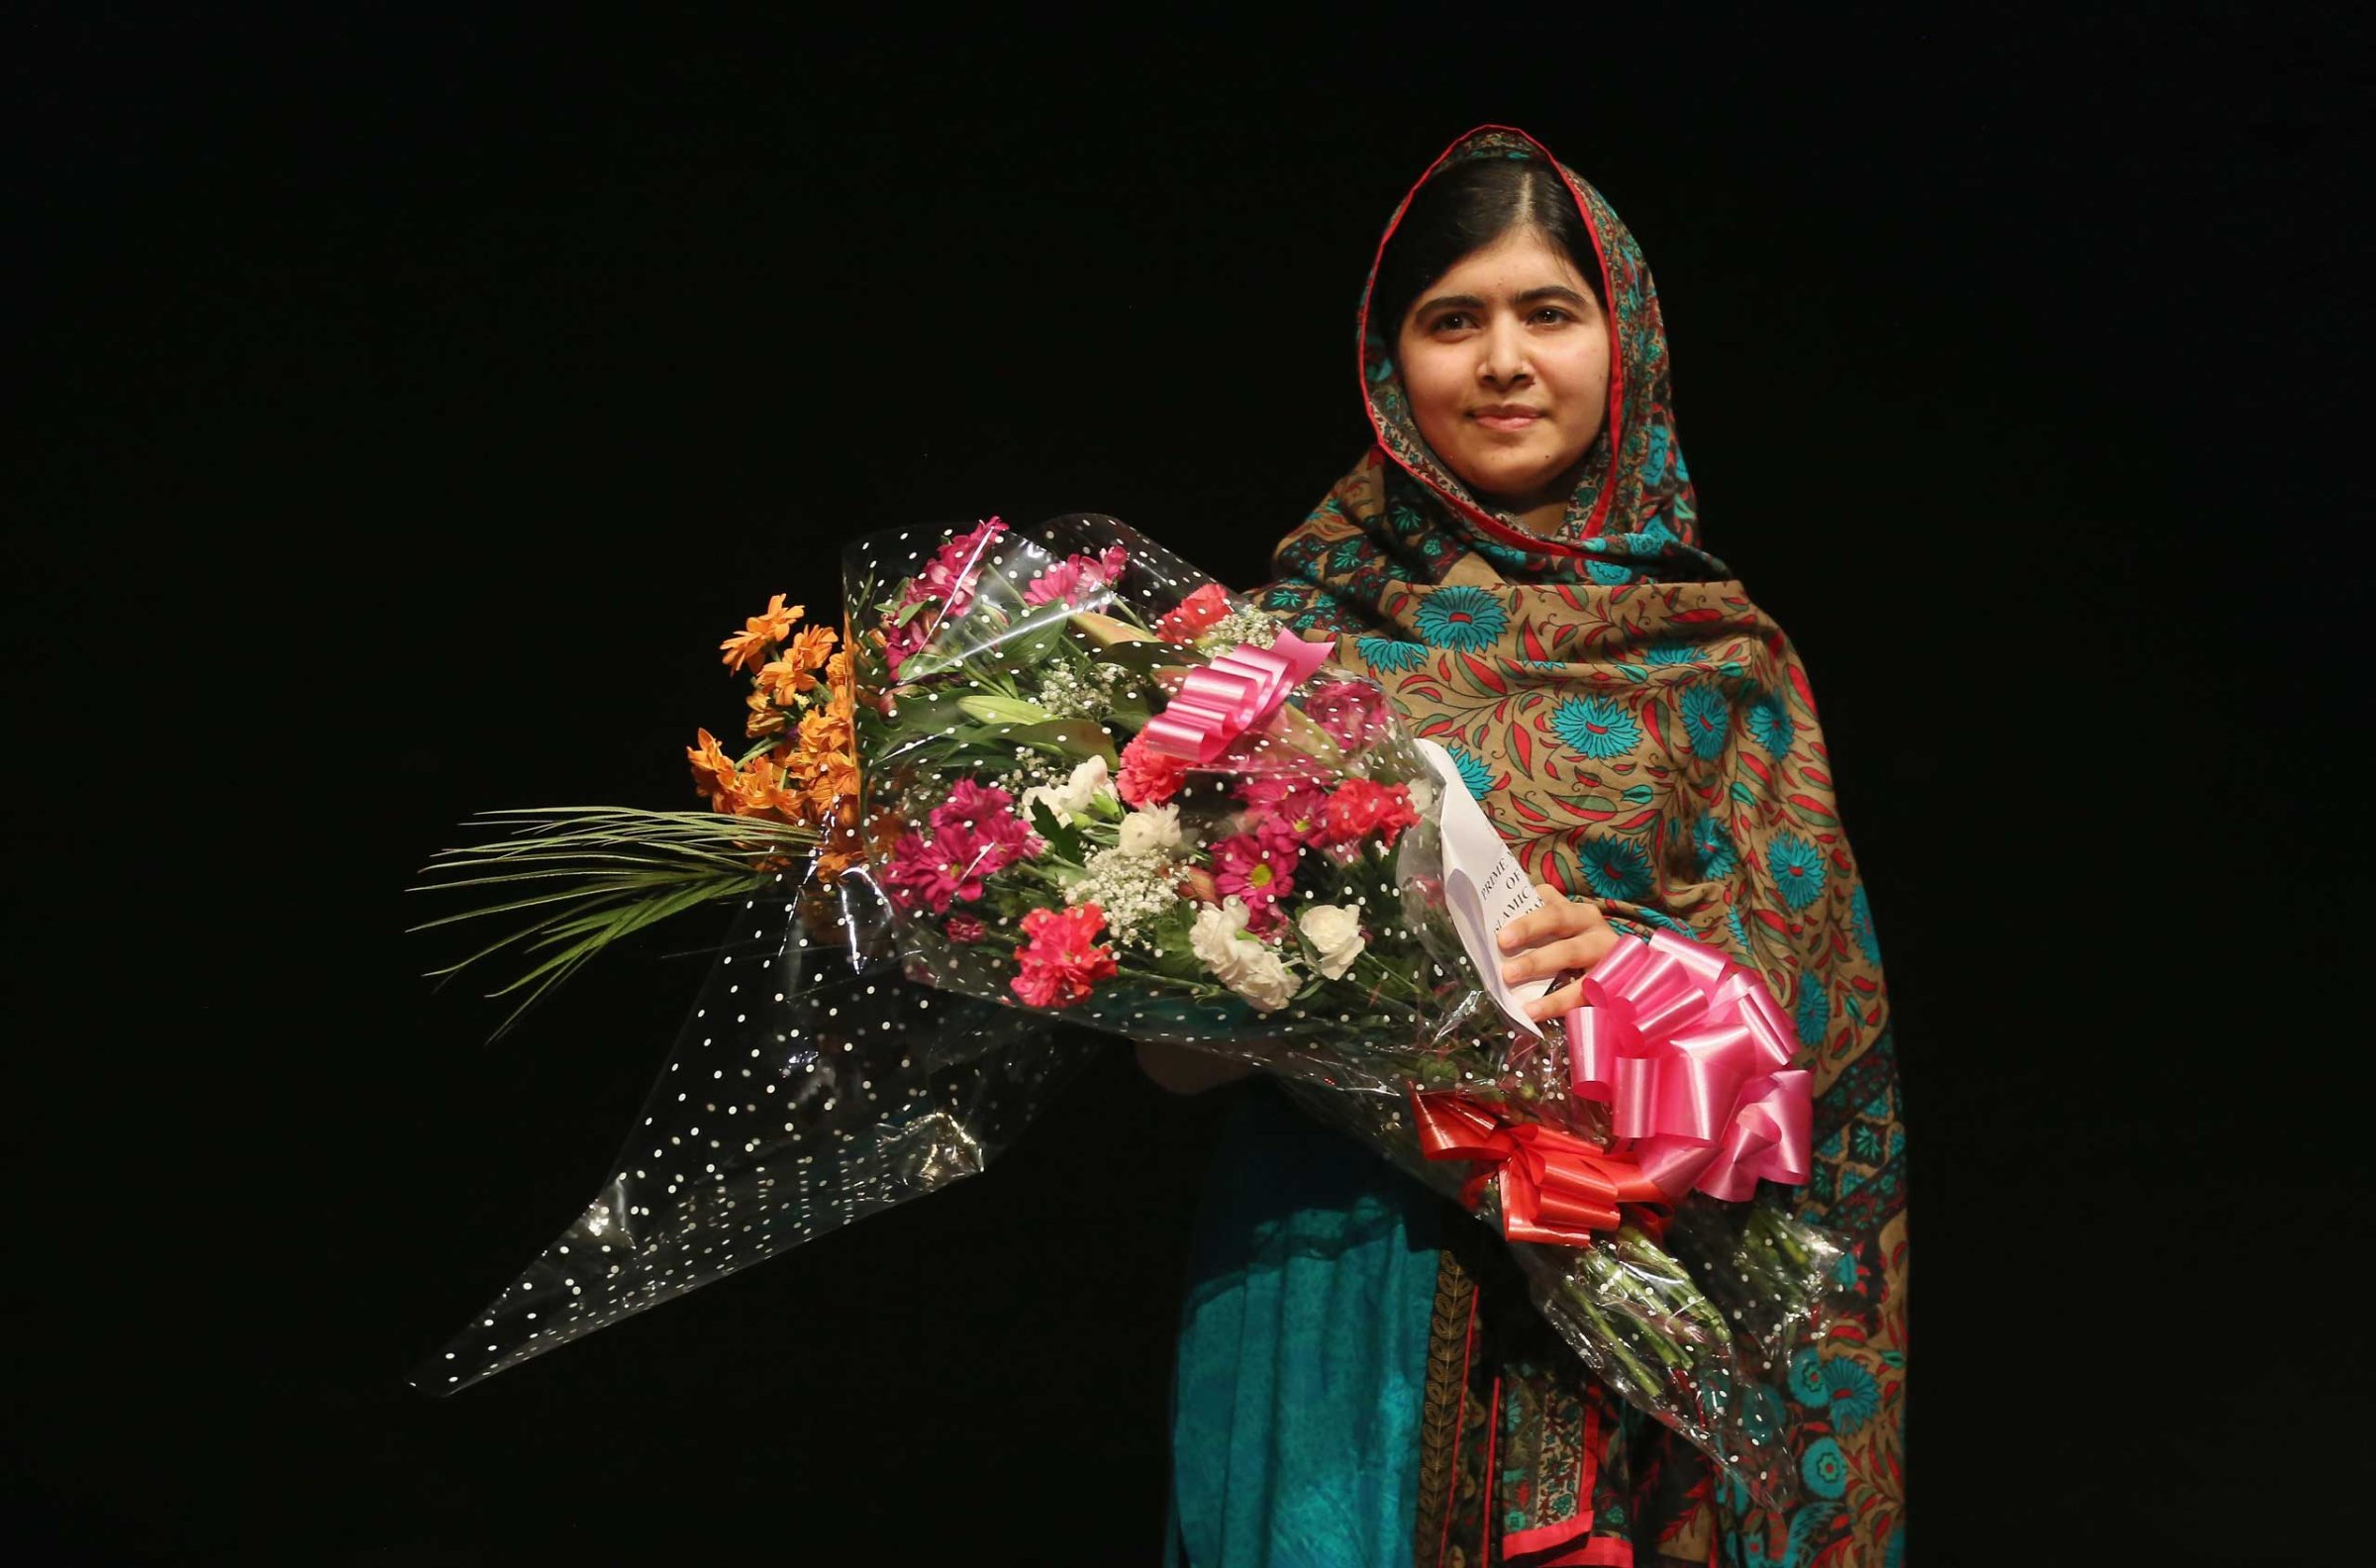 Malala Yousafzai after being announced as a recipient of the Nobel Peace Prize in Birmingham, England on October 10, 2014.